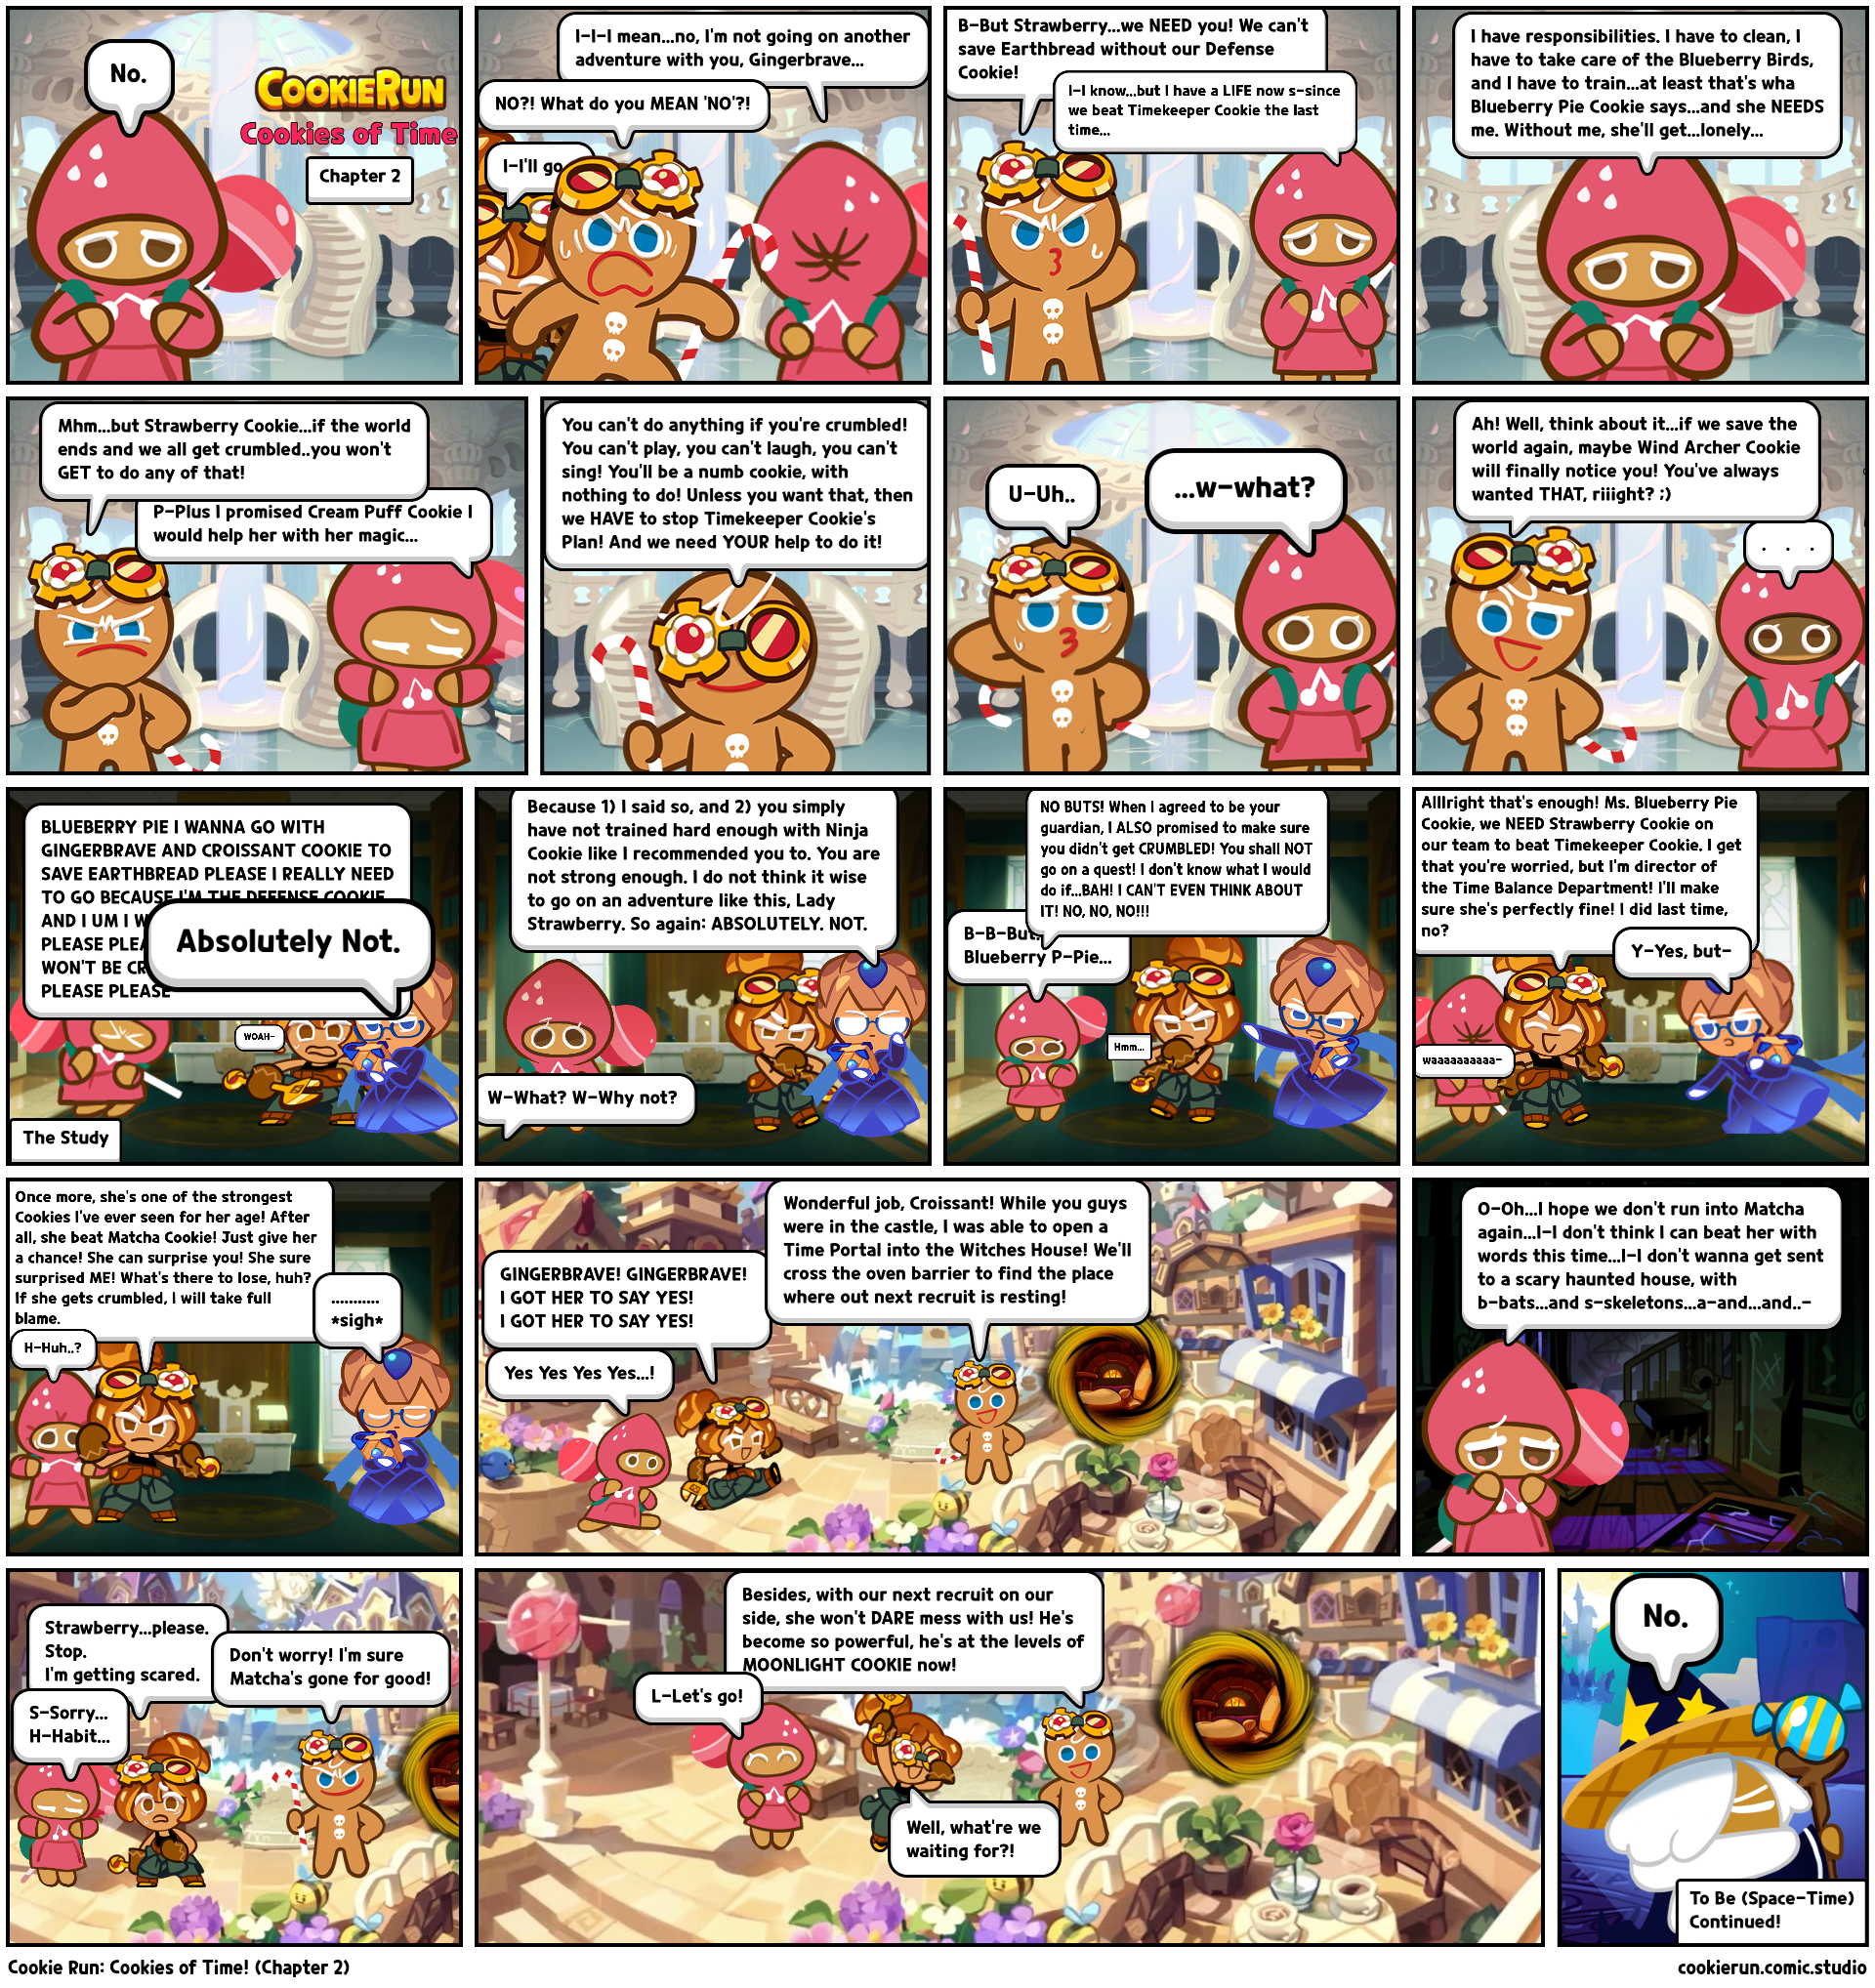 Cookie Run: Cookies of Time! (Chapter 2)